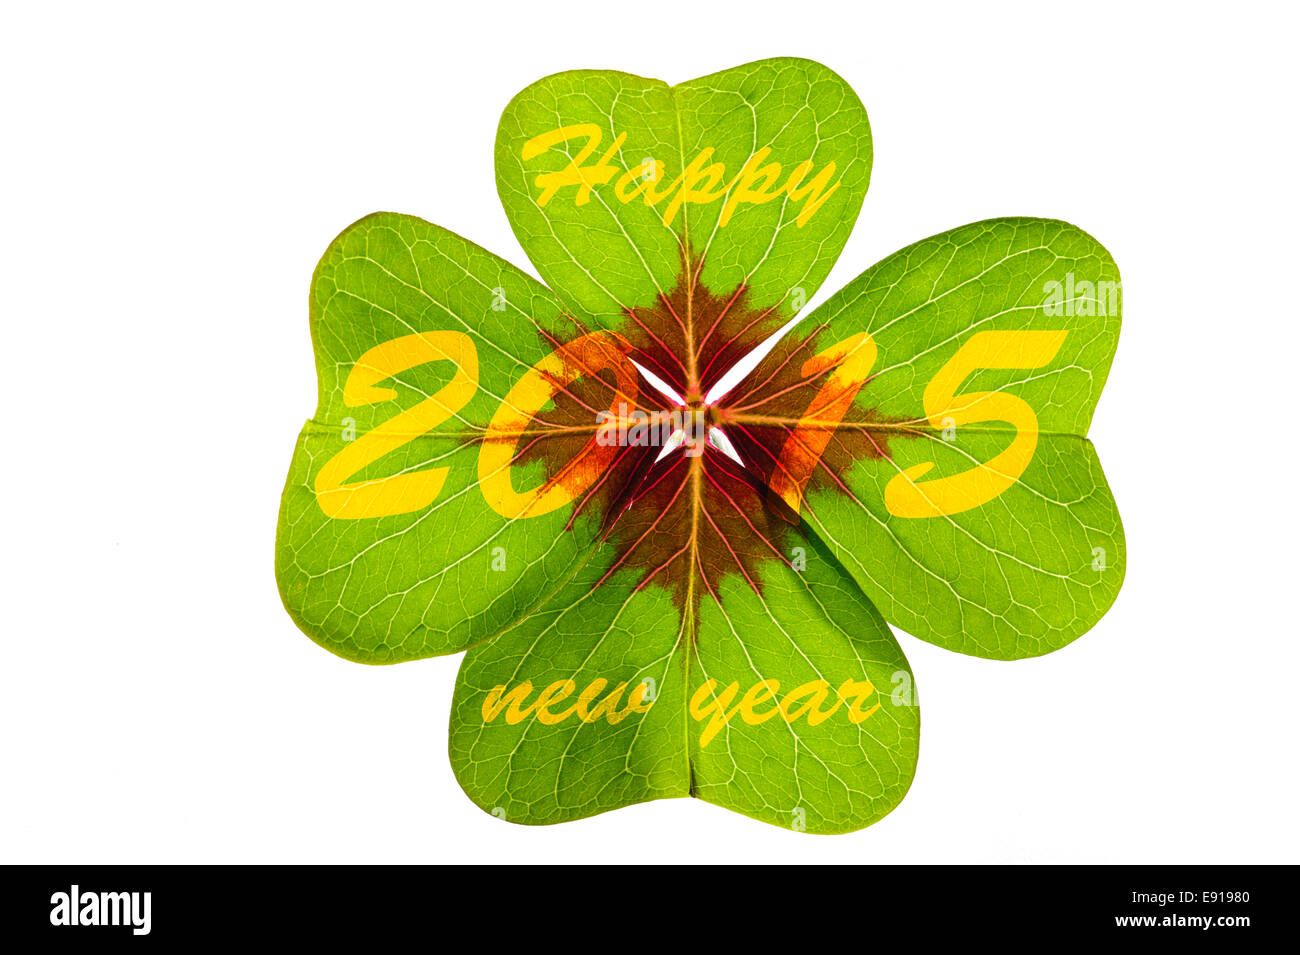 new year 2015 with clover leaf Stock Photo